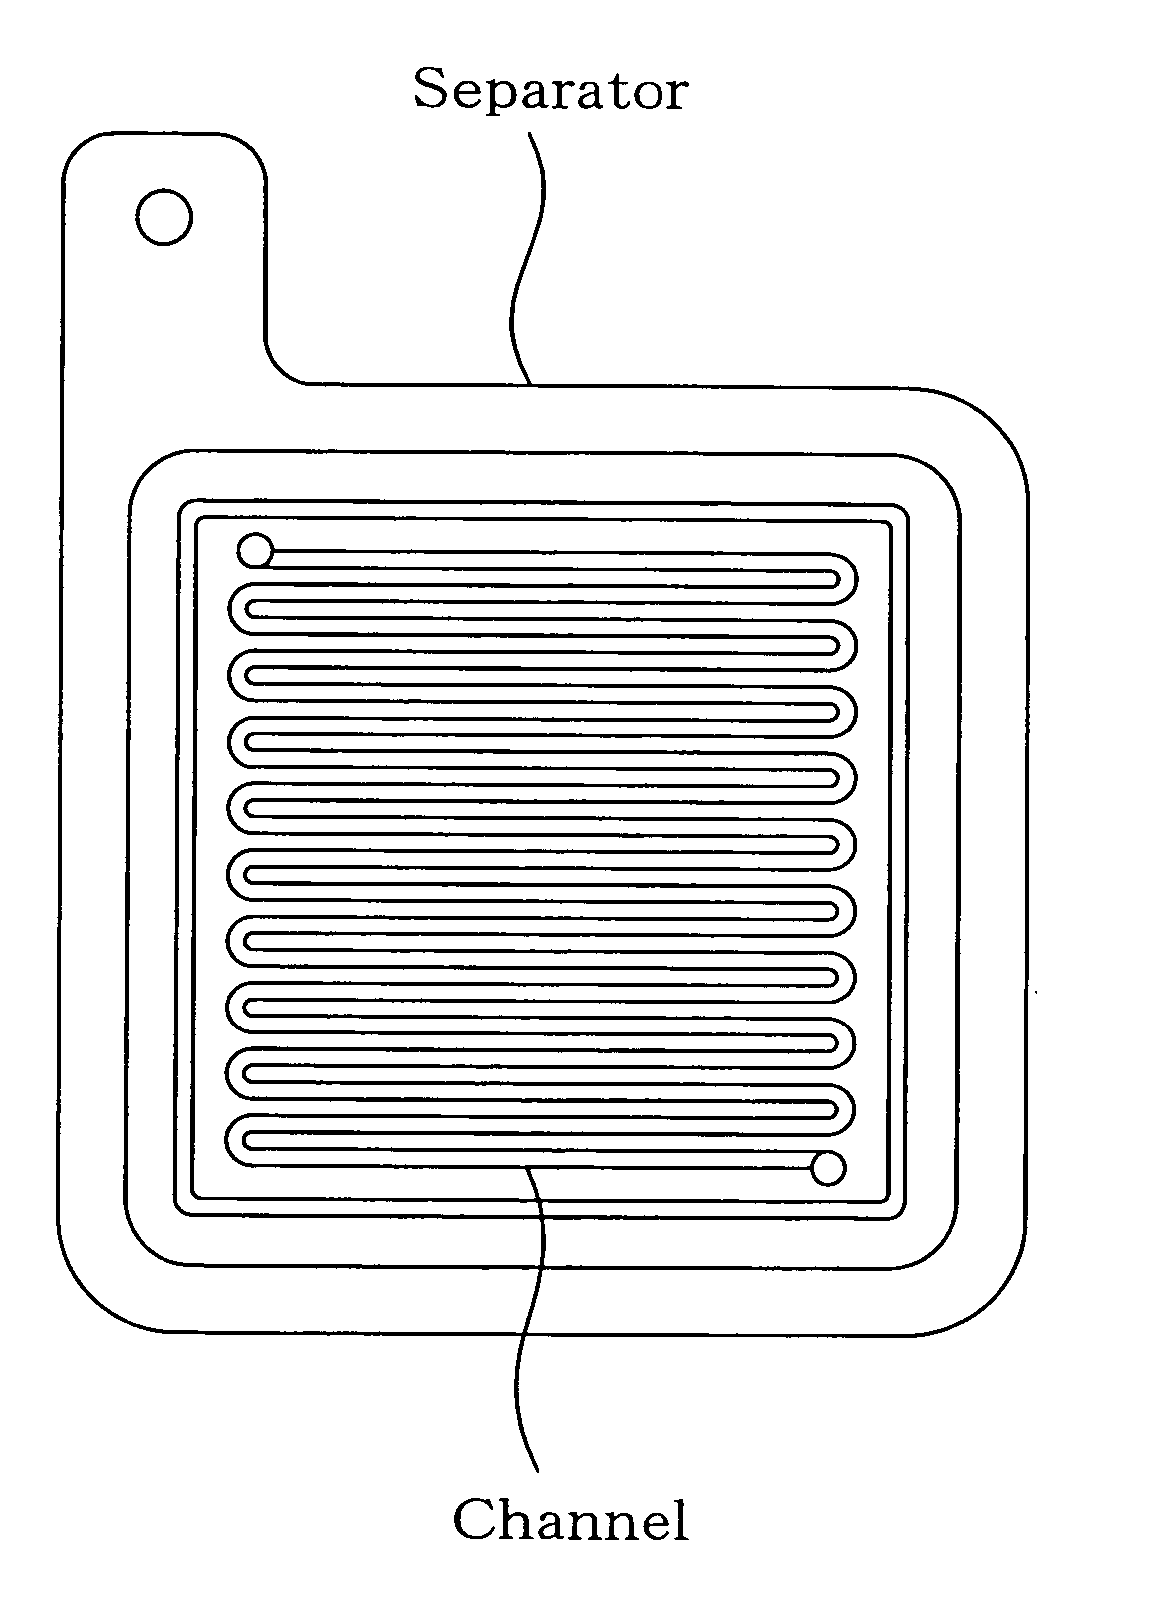 Separator for fuel cell, method for producing the same, and fuel cell using the same